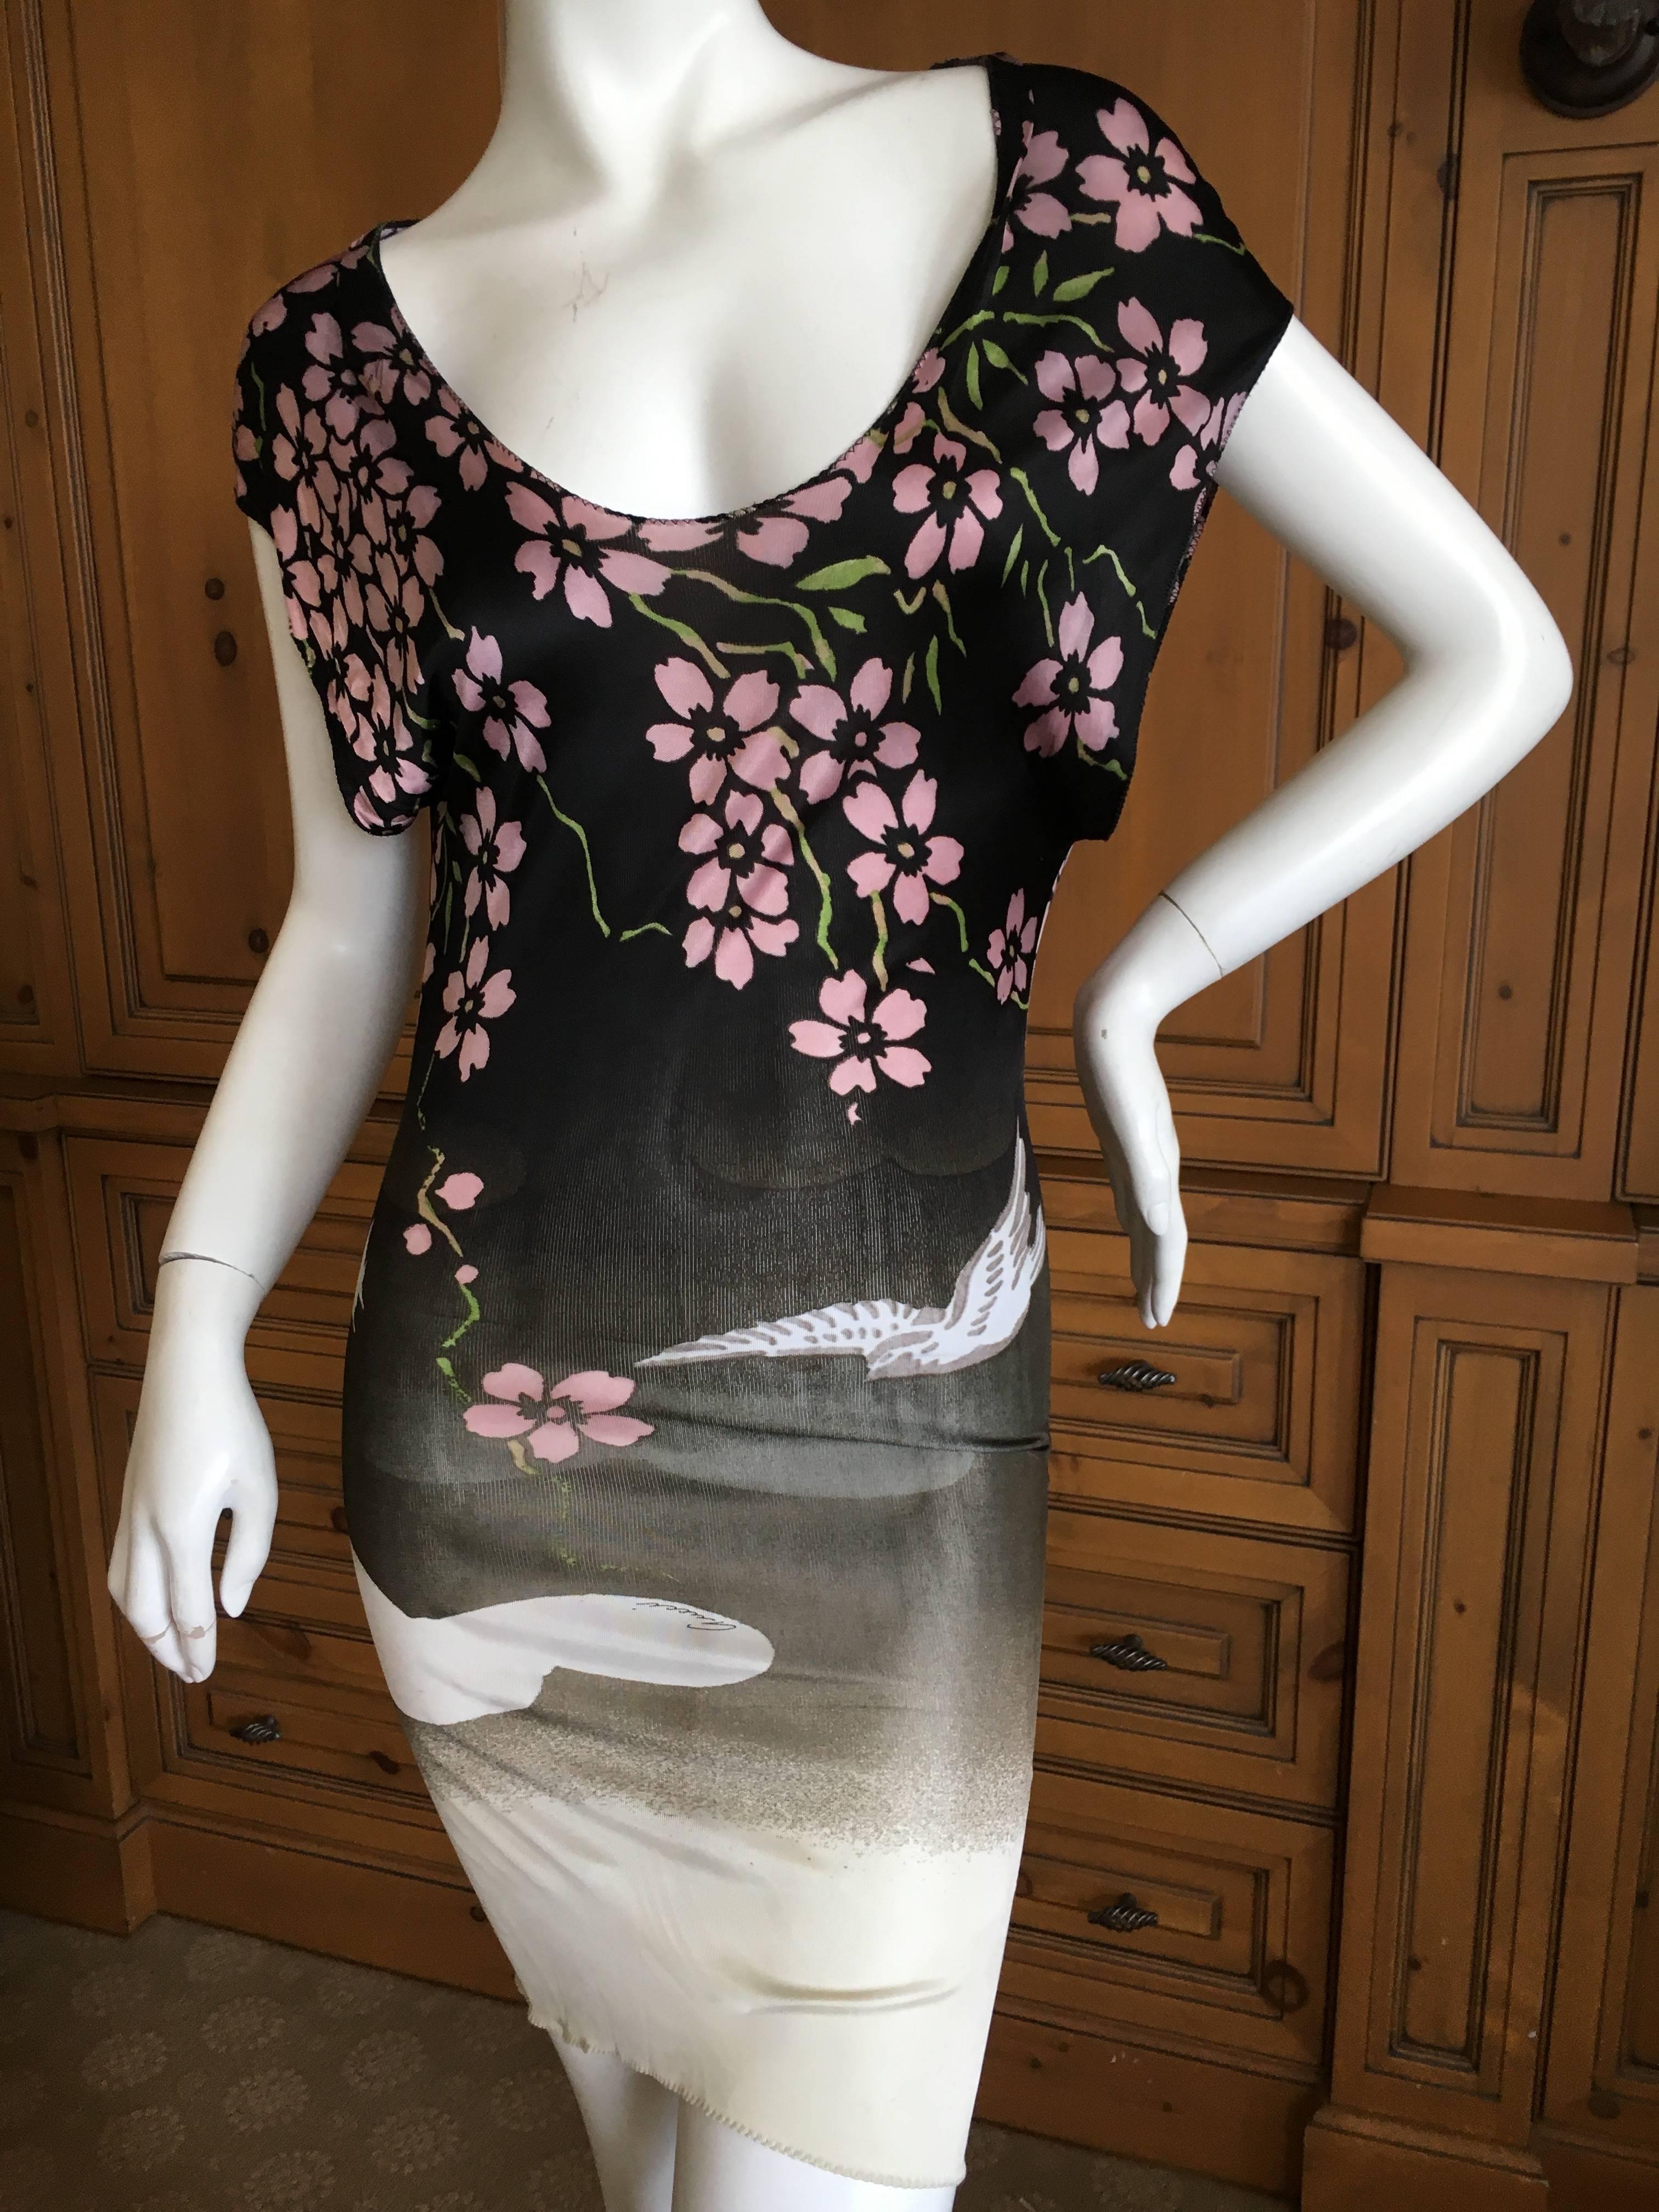 Gucci by Tom Ford Japonaise Dogwood Blossom Mini Dress.
Size XS
Bust 36"
Waist 24"
Hips 38"
Length 36"
Excellent condition 